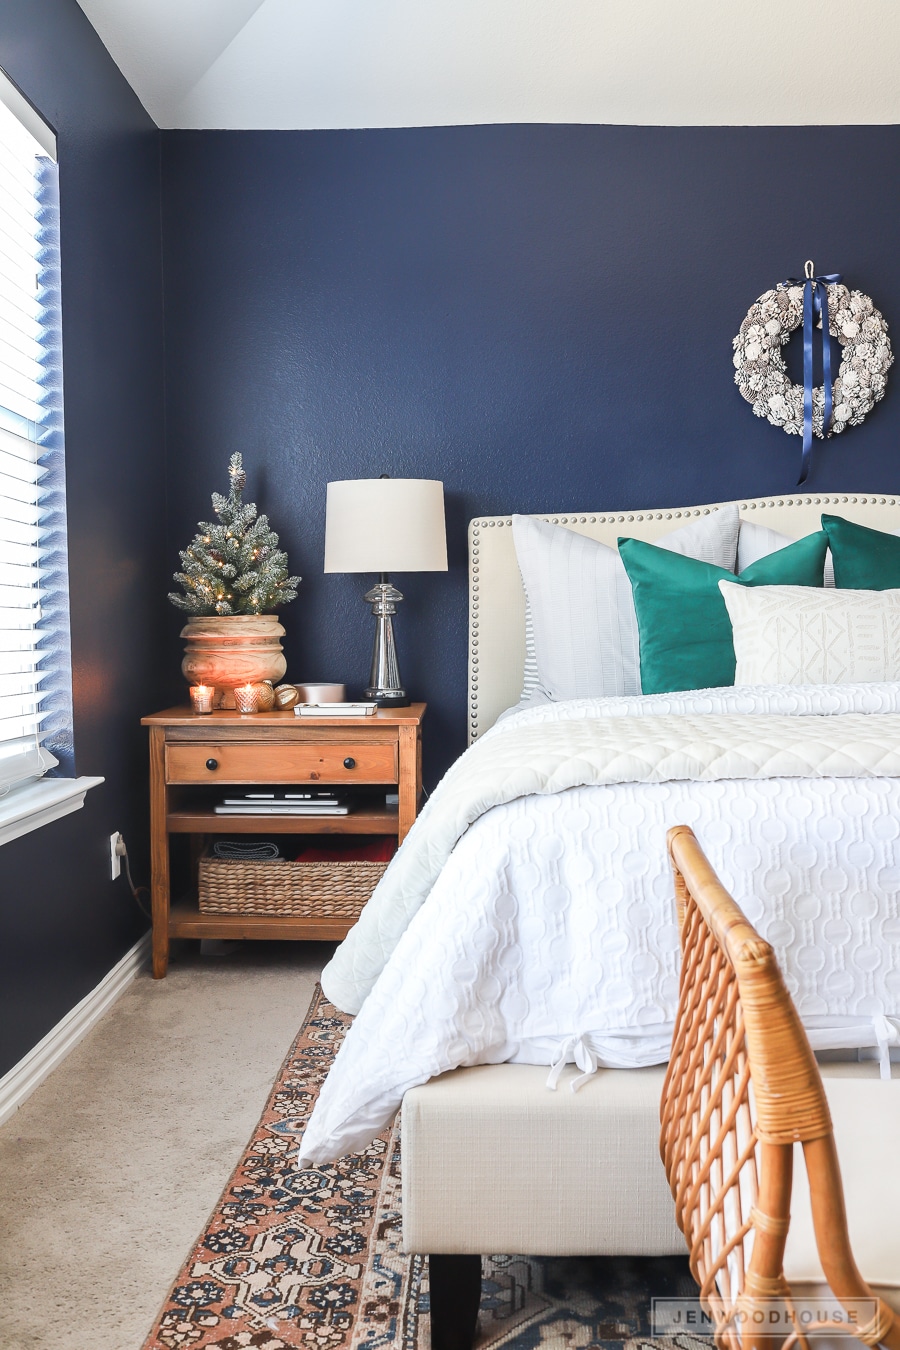 How to decorate your bedroom for Christmas